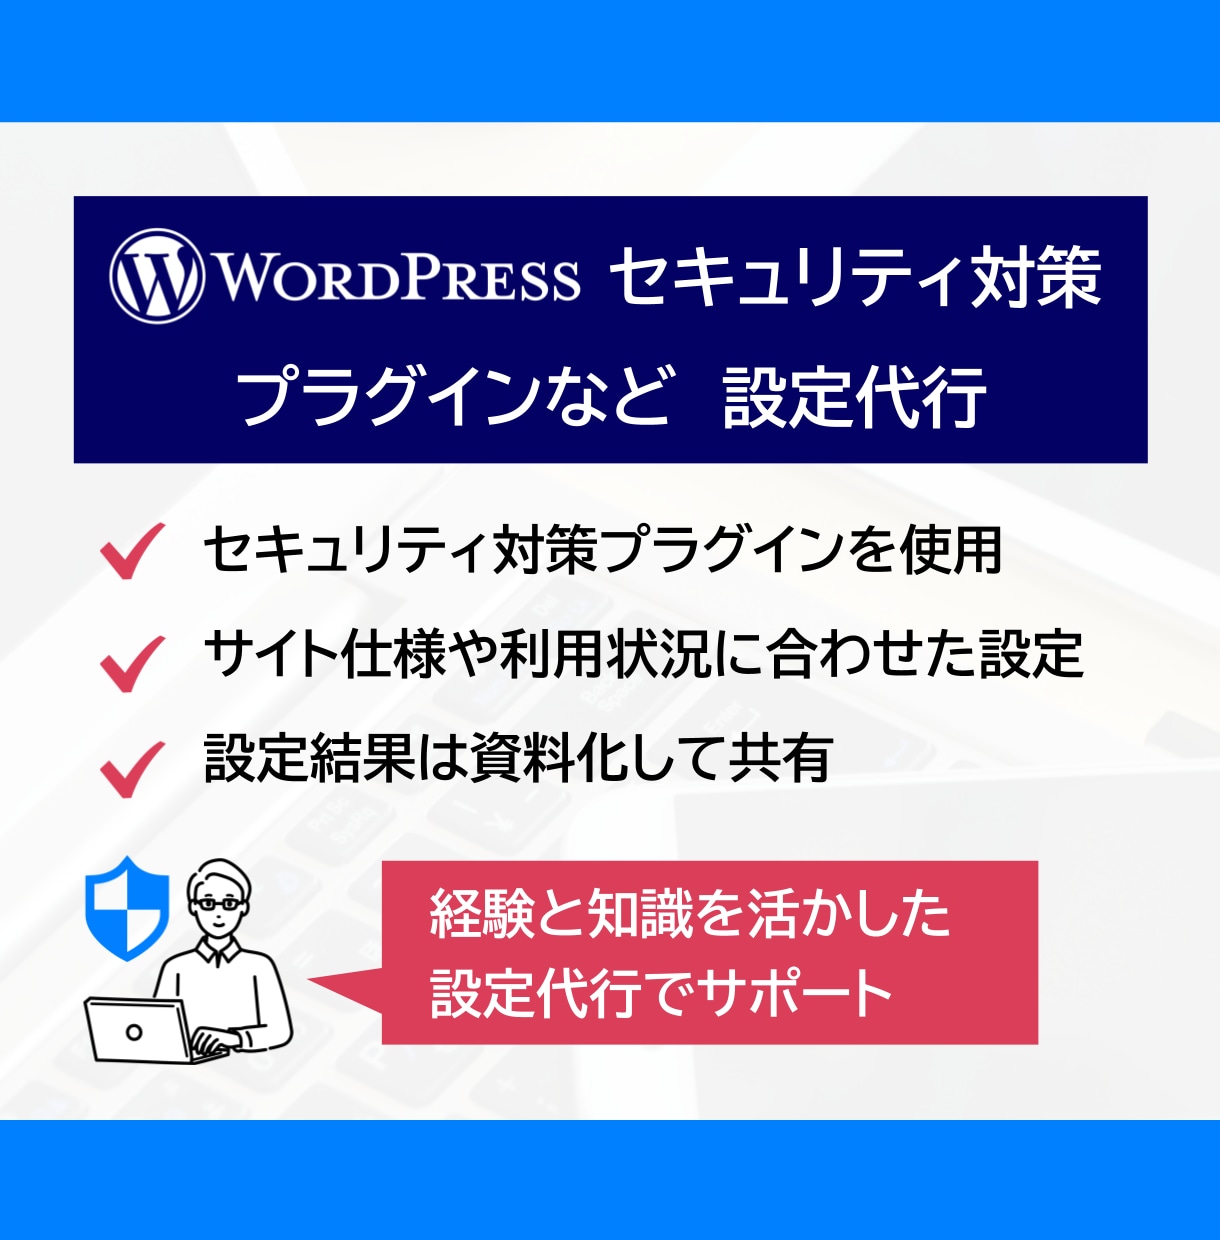 💬Coconara｜We will take security measures for your WordPress site Create Accord (Activity name: Night free) – …